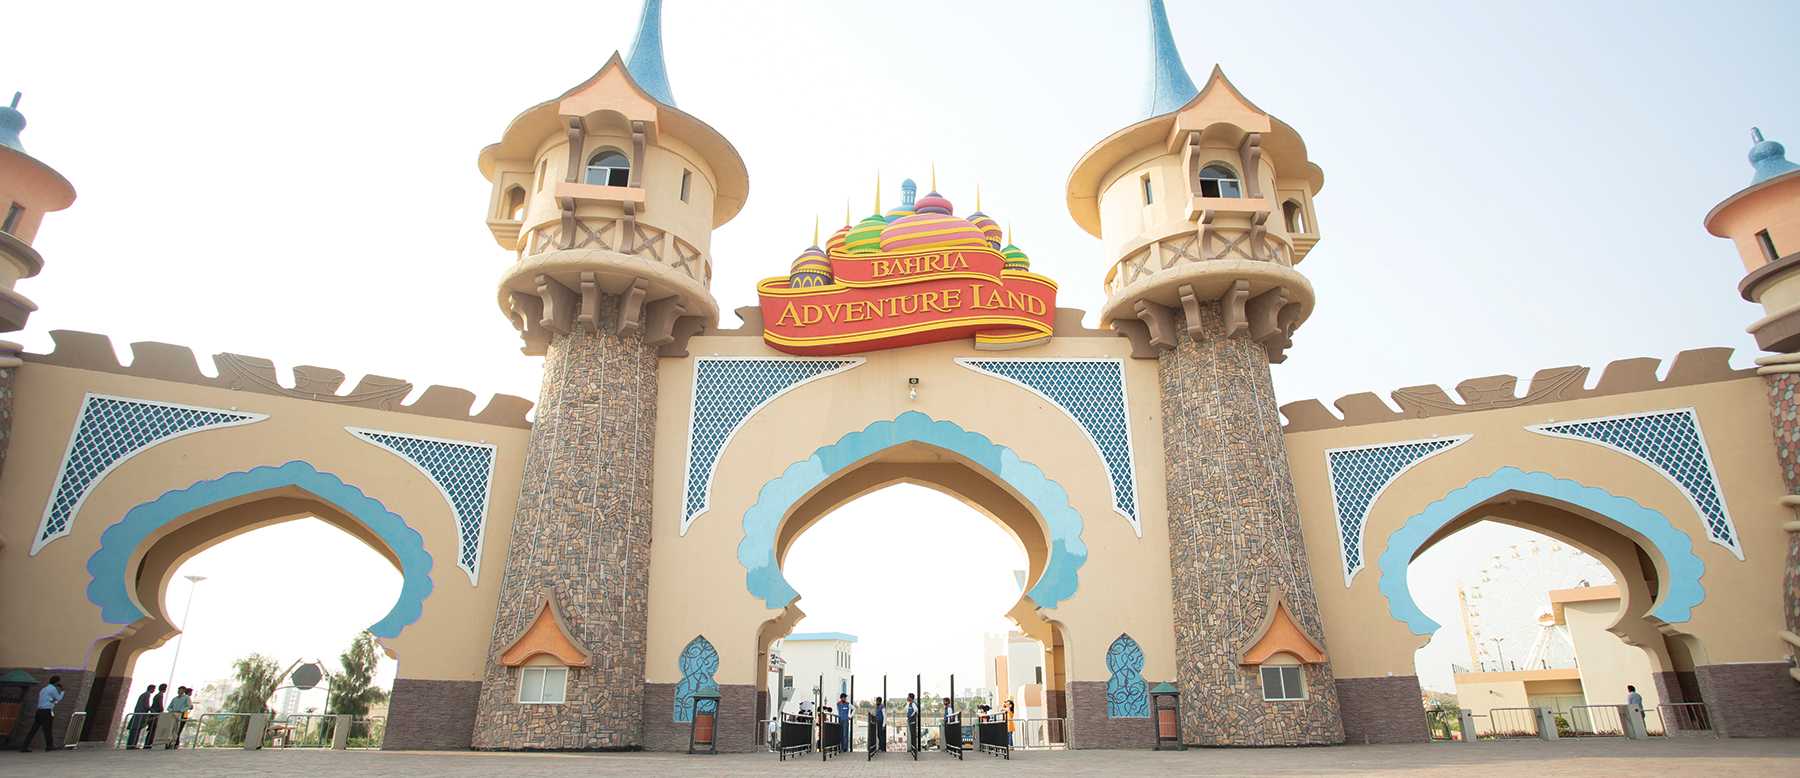 Bahria Adventure Land Ticket Price and Timings